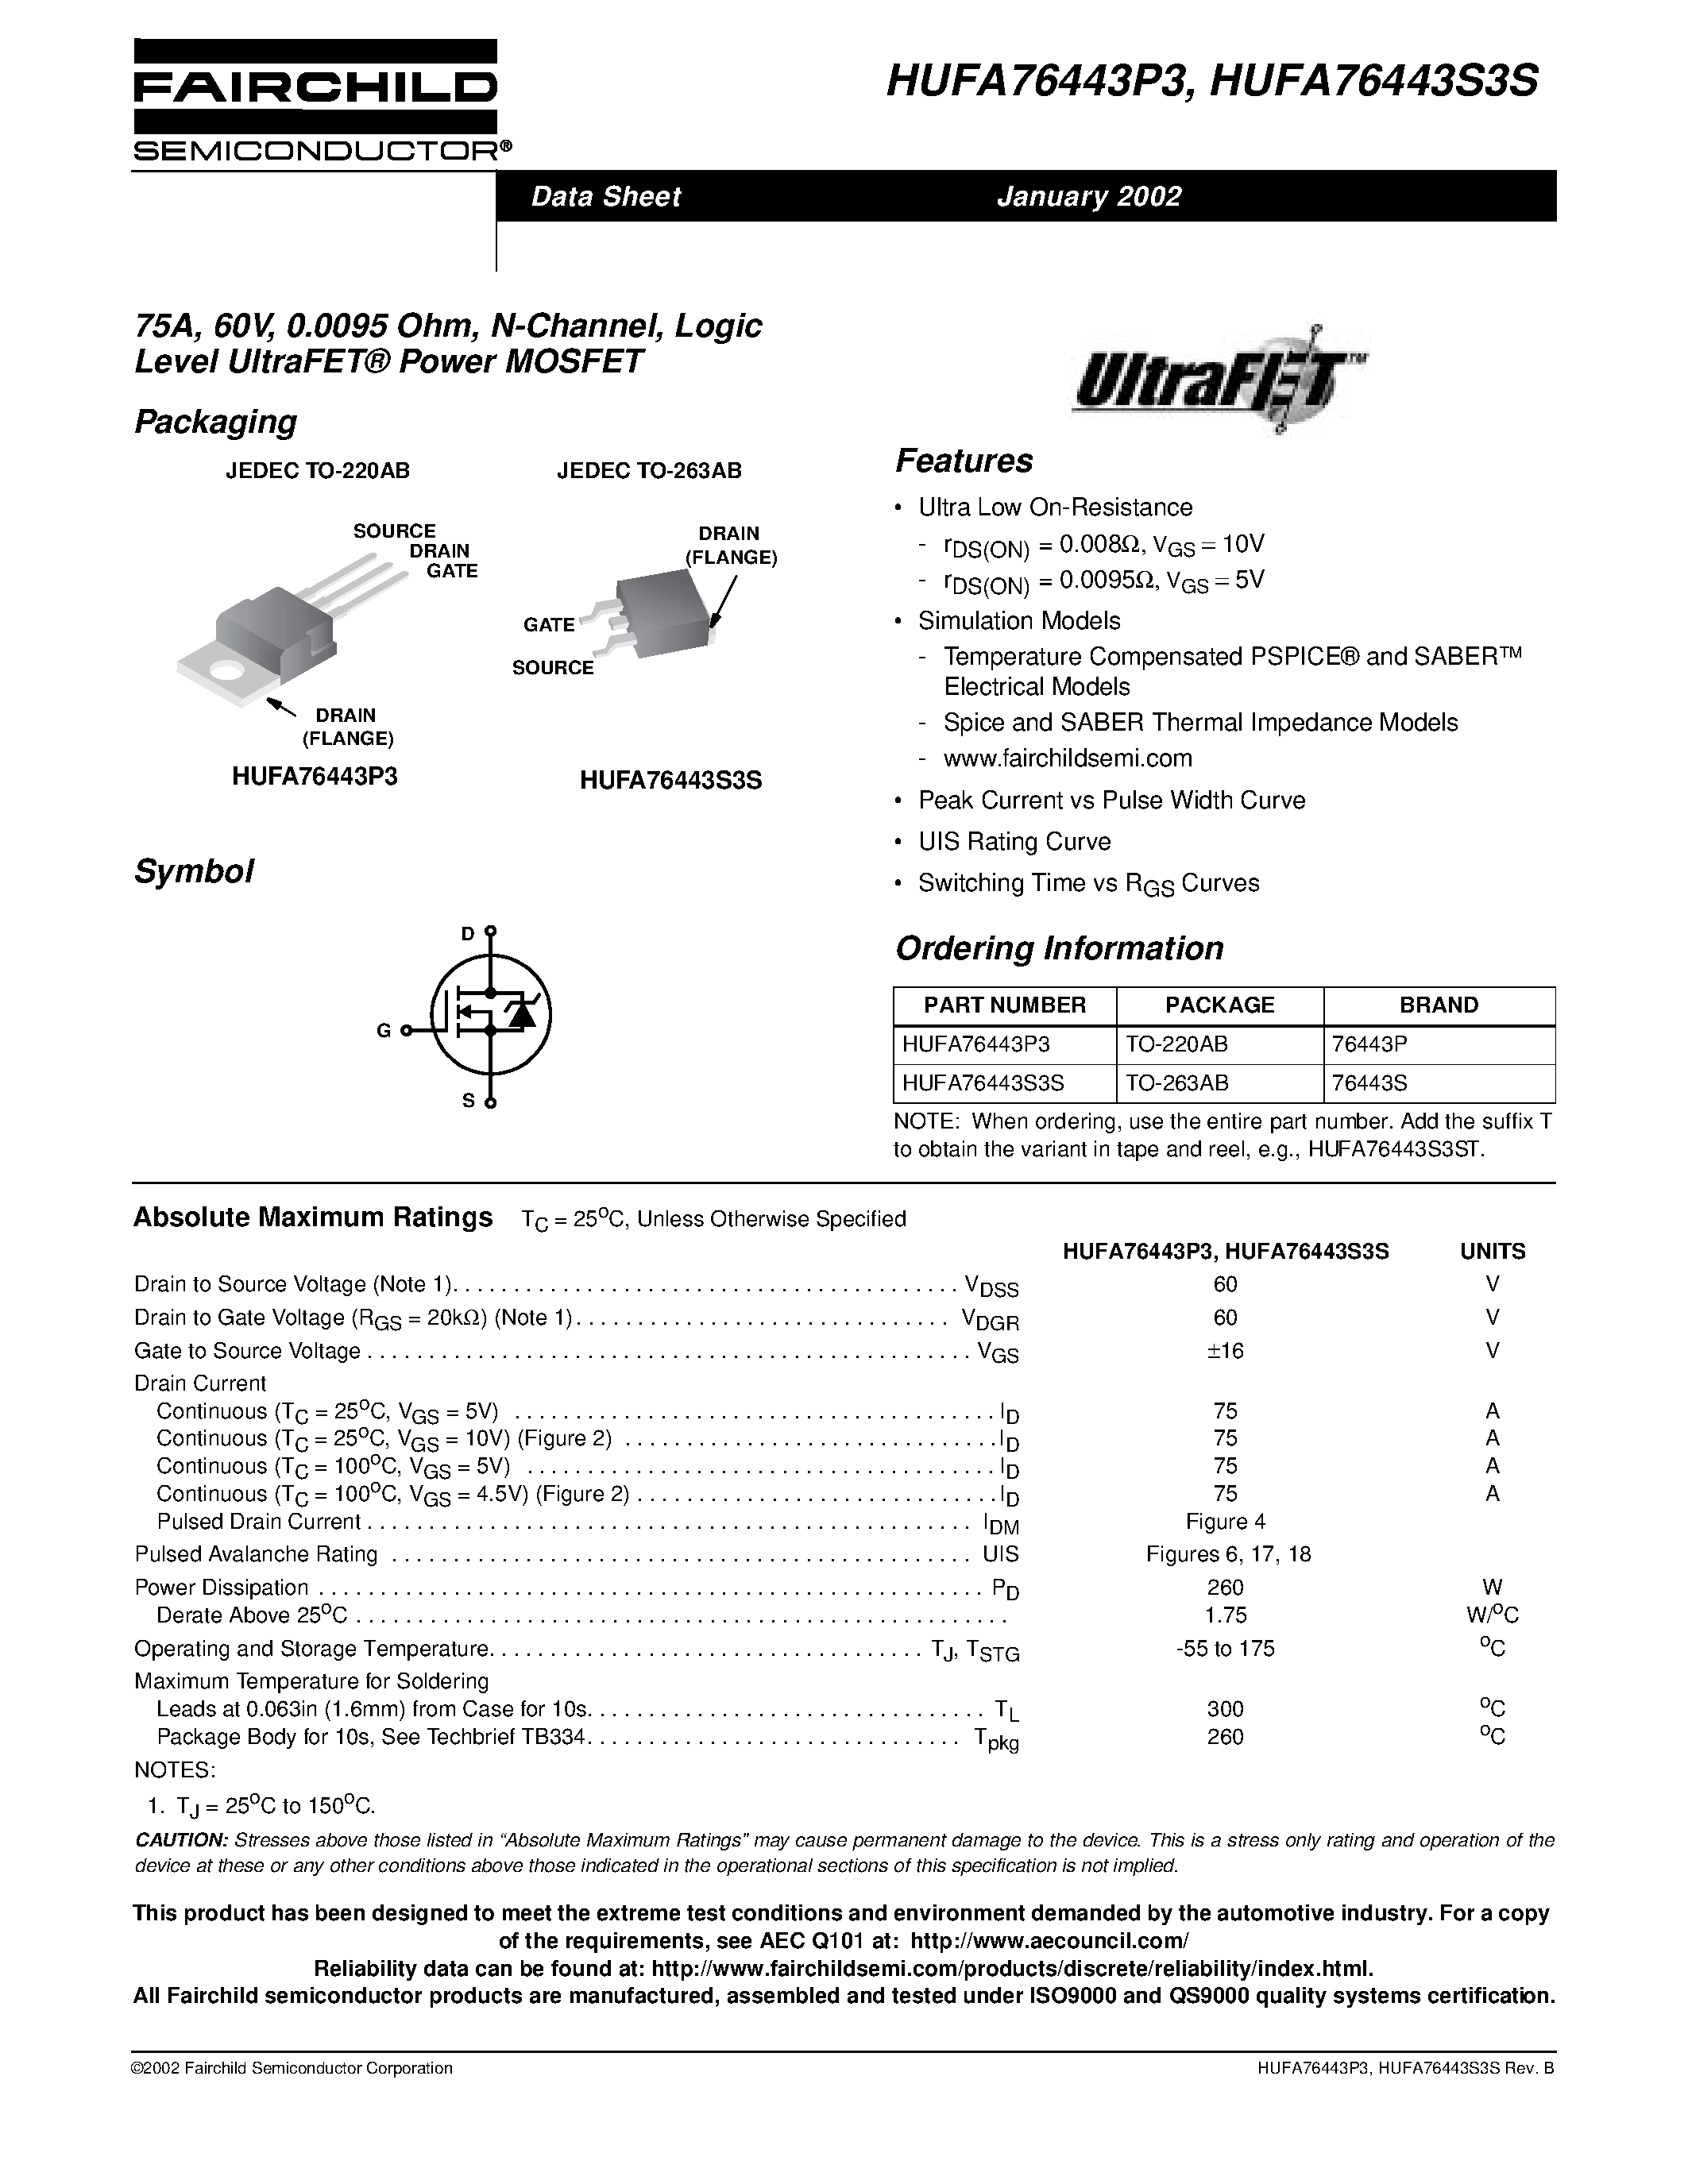 Datasheet HUFA76443S3S - 75A/ 60V/ 0.0095 Ohm/ N-Channel/ Logic Level UltraFET Power MOSFET page 1